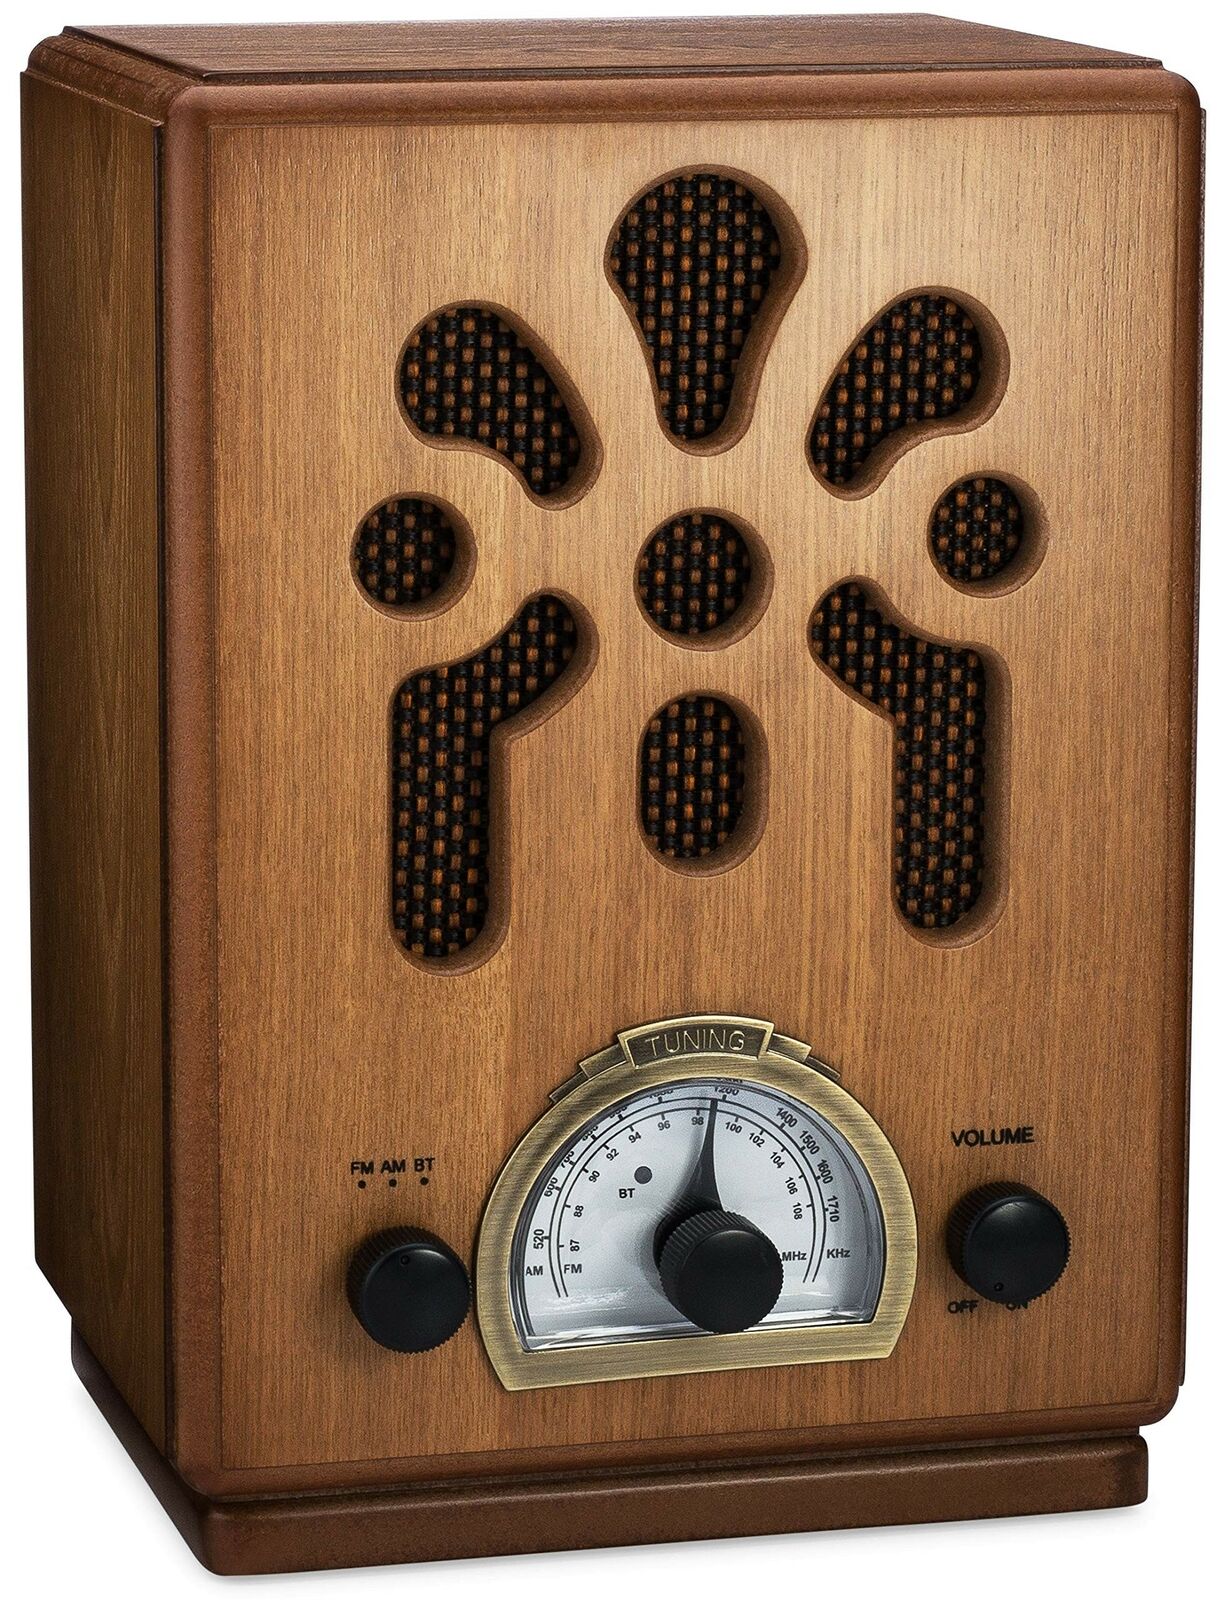 ClearClick Classic Vintage Retro Style Handmade Wooden AM/FM Radio w/ Bluetooth